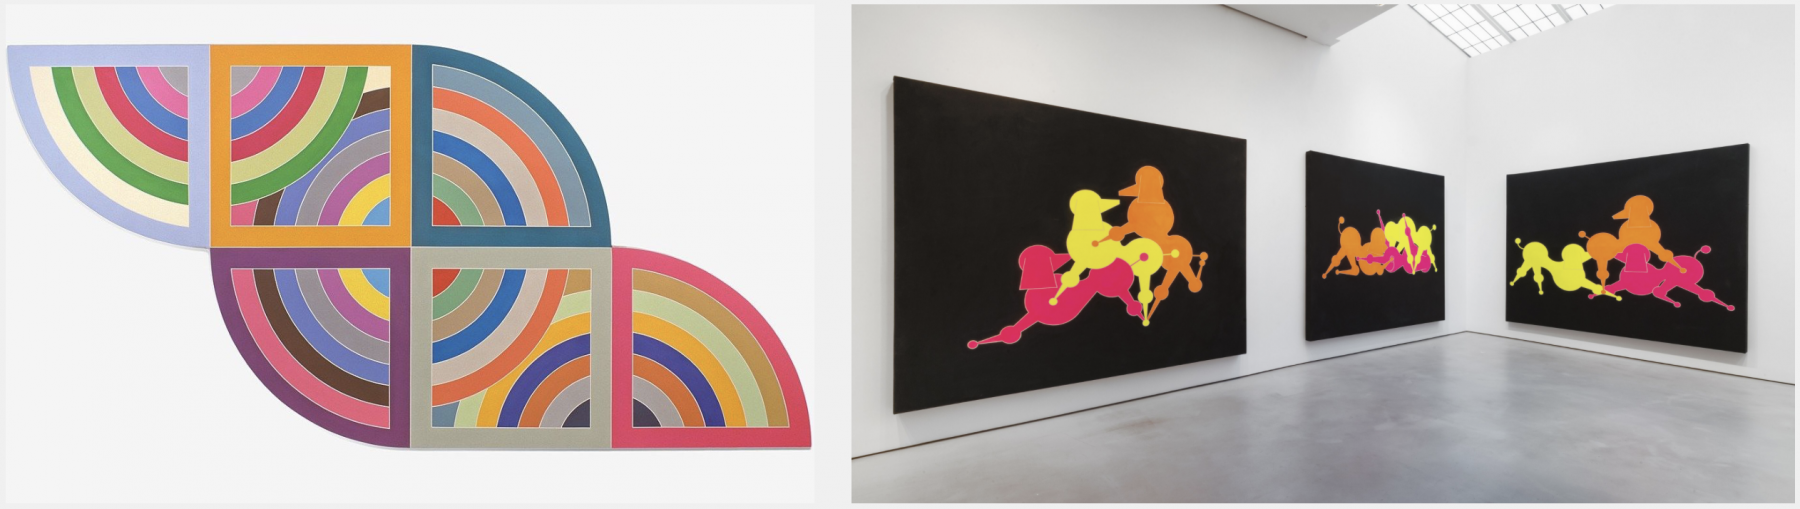 Left: Frank Stella, Harran II (1967) / Solomon R. Guggenheim Museum, New York (Gift, Mr. Irving Blum, 1982) &copy; Frank Stella / Artists Rights Society (ARS), New York.

Right: GENERAL IDEA, Installation view of Mondo Cane Kama Sutra (1984) in P is for Poodle at Mitchell-Innes &amp; Nash, New York, 2020.